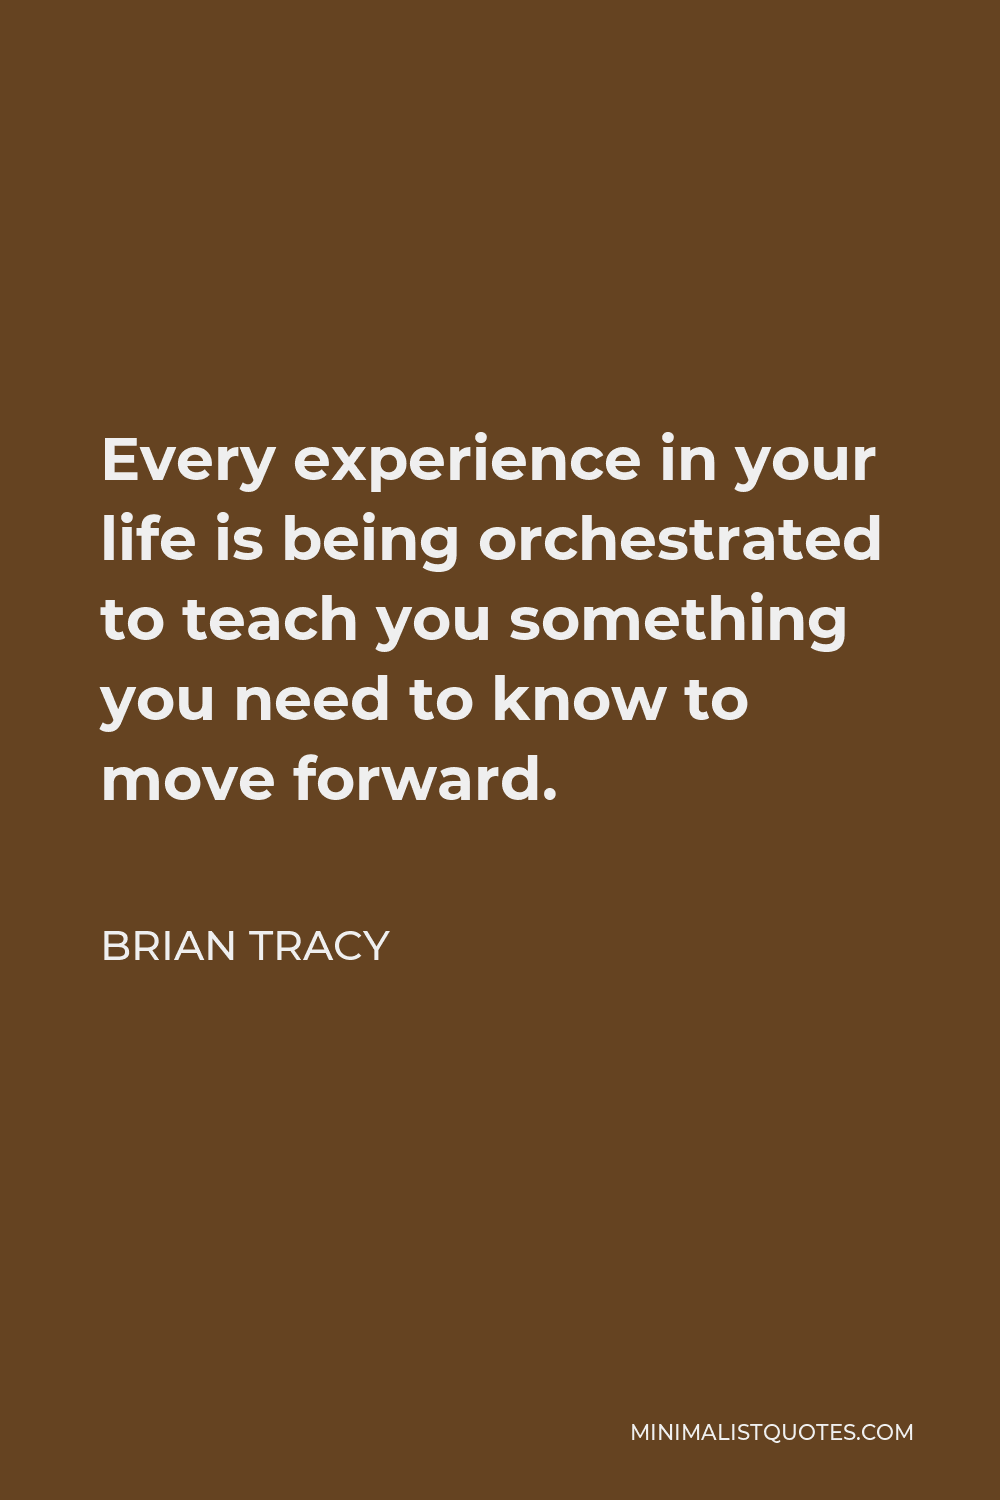 Brian Tracy Quote - Every experience in your life is being orchestrated to teach you something you need to know to move forward.